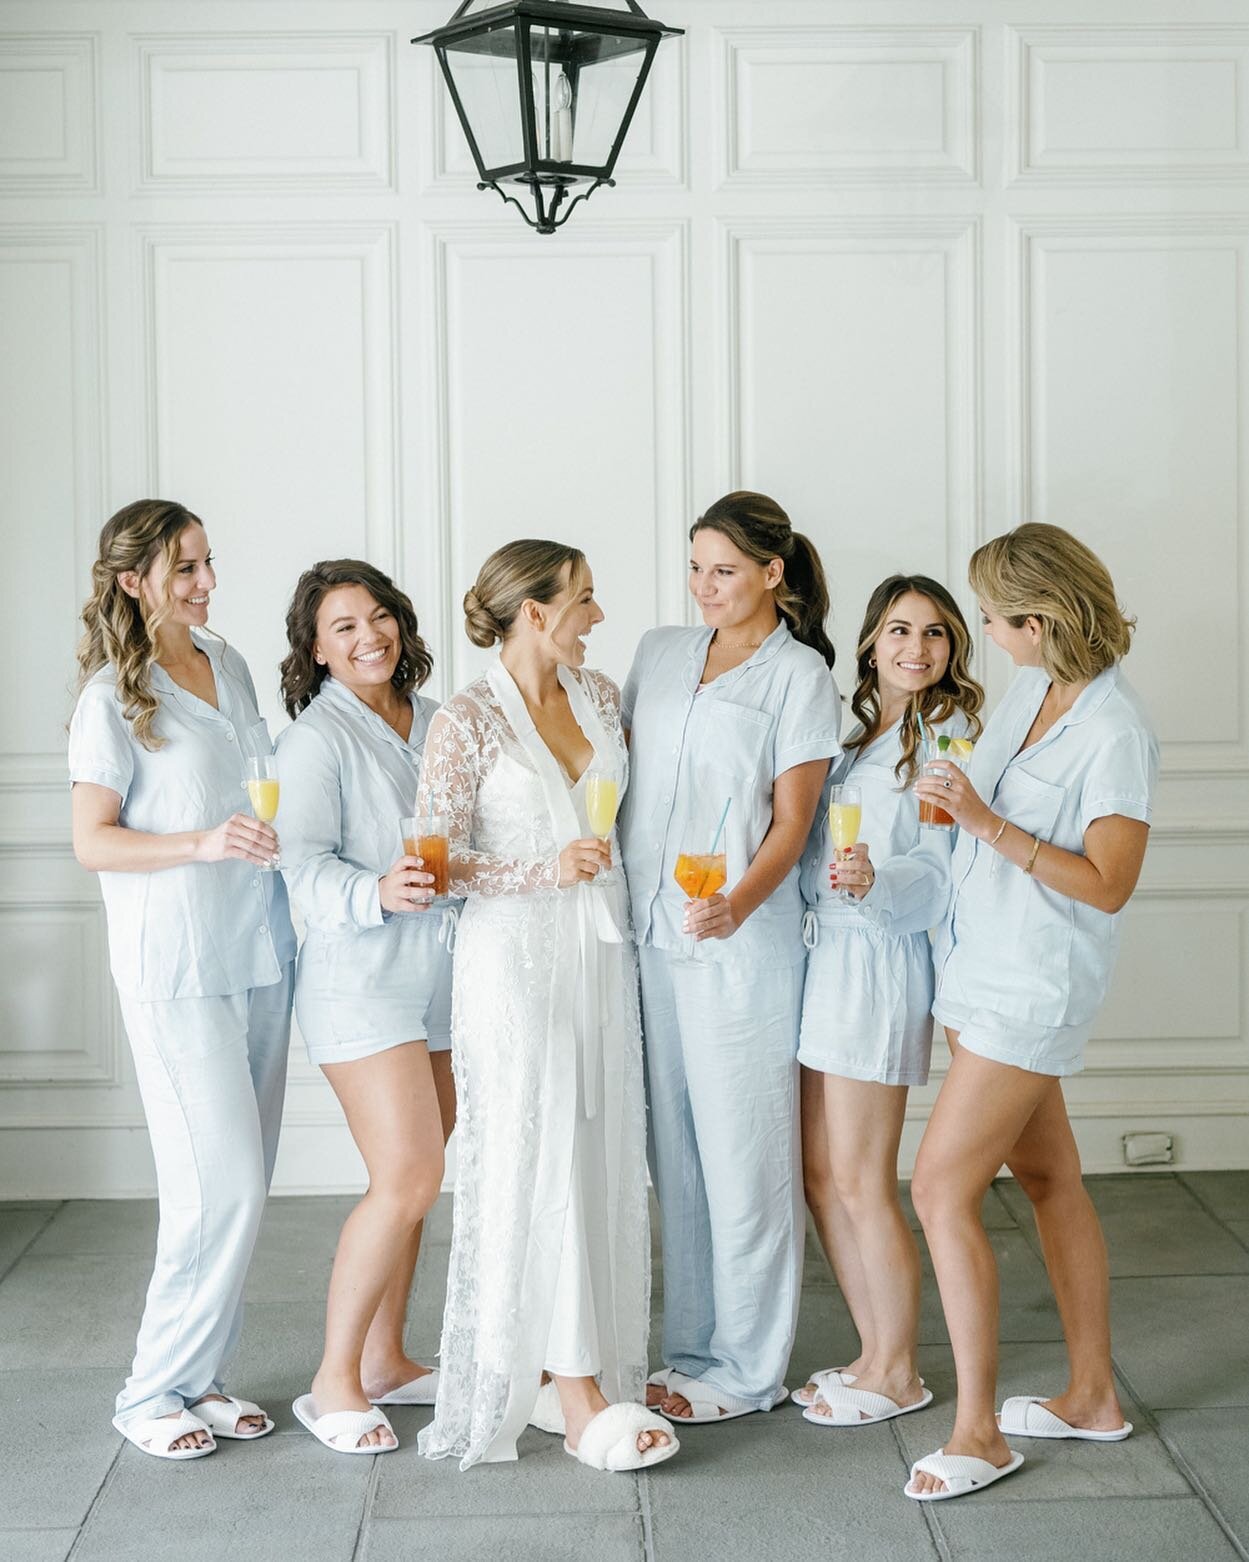 i truly have the bestest gals a girl could ask for ❤️no matter what, a friend fills your heart in a special way that no one else can.
.
.
.
.
.
#nywedding #classicweddingphotographer #blacktiewedding #bridesmaidsgettingready #bridesmaidstoast #apawam